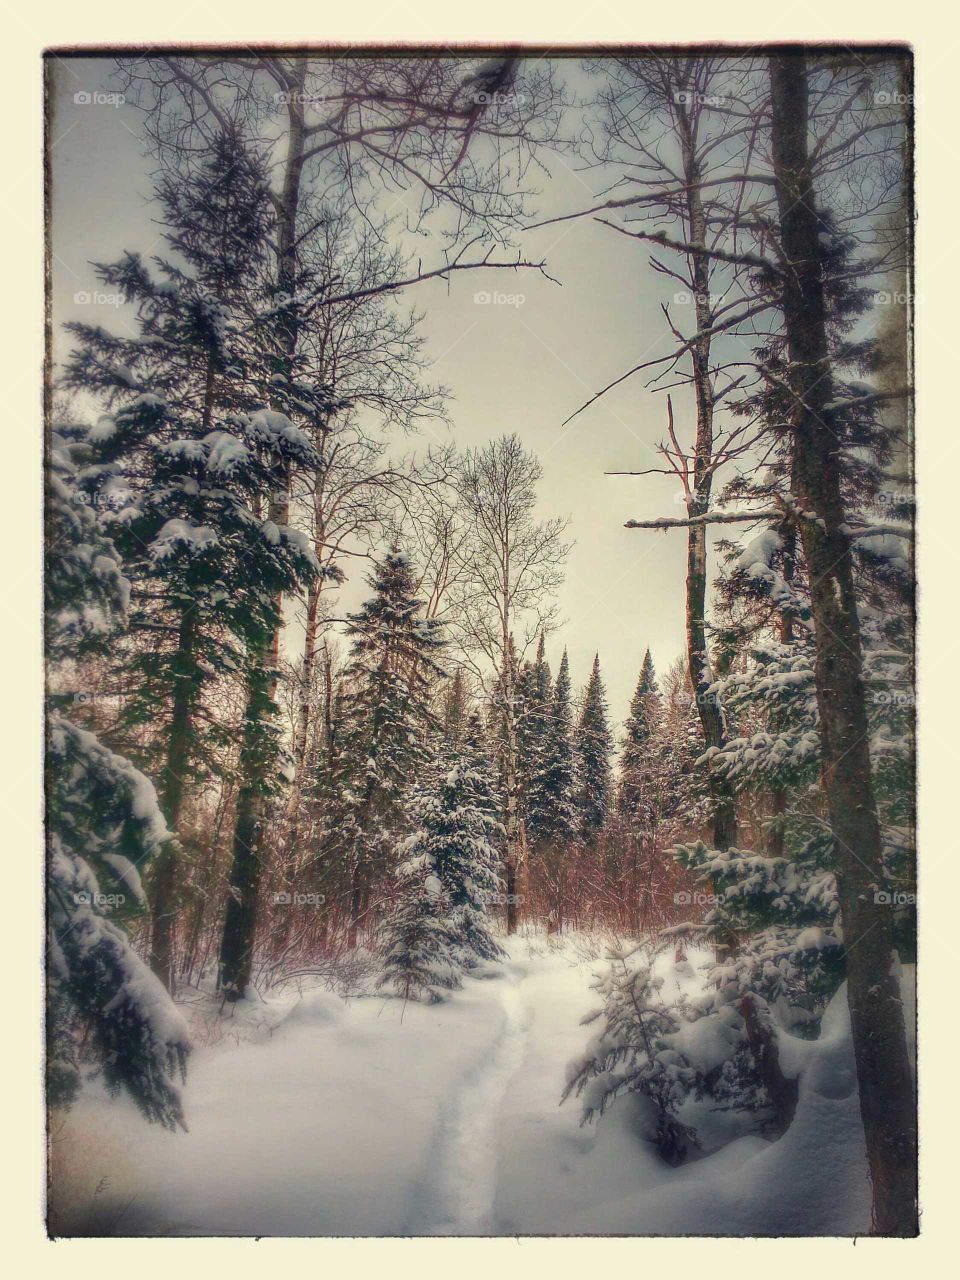 Path in the forest in winter time with trees covered with snow, with effect